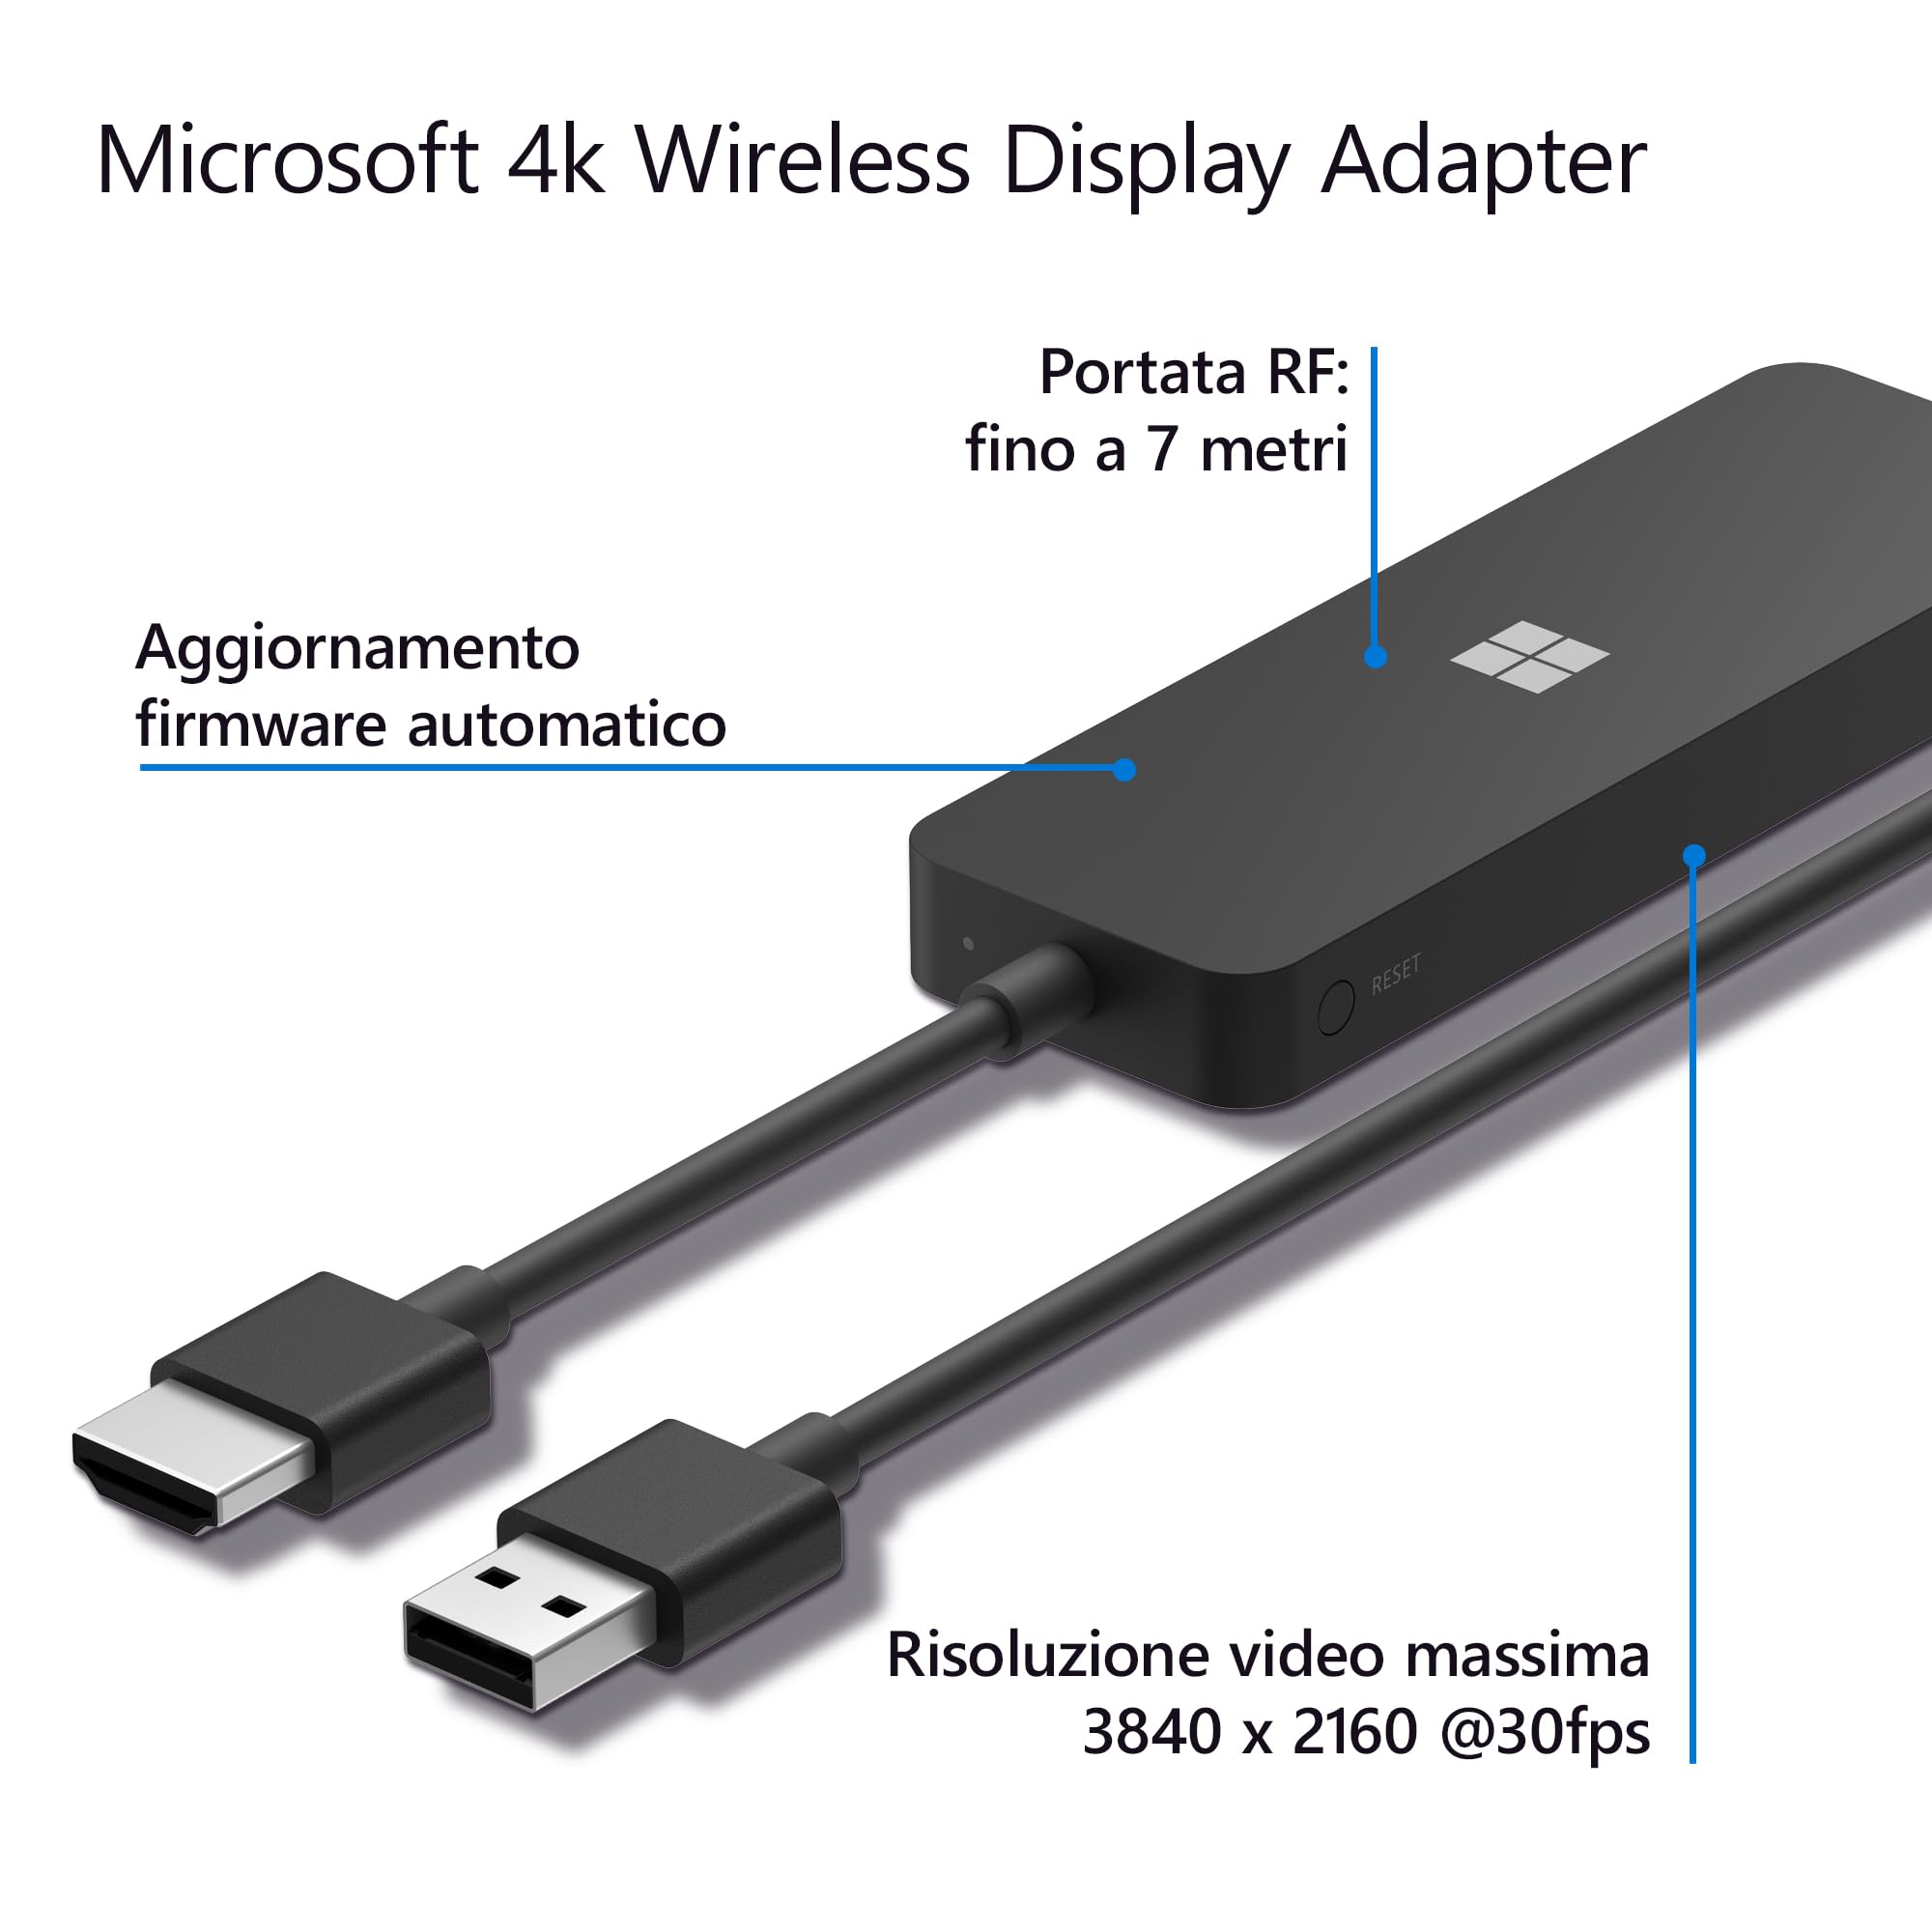 Power button on a Microsoft Wireless Display Adapter